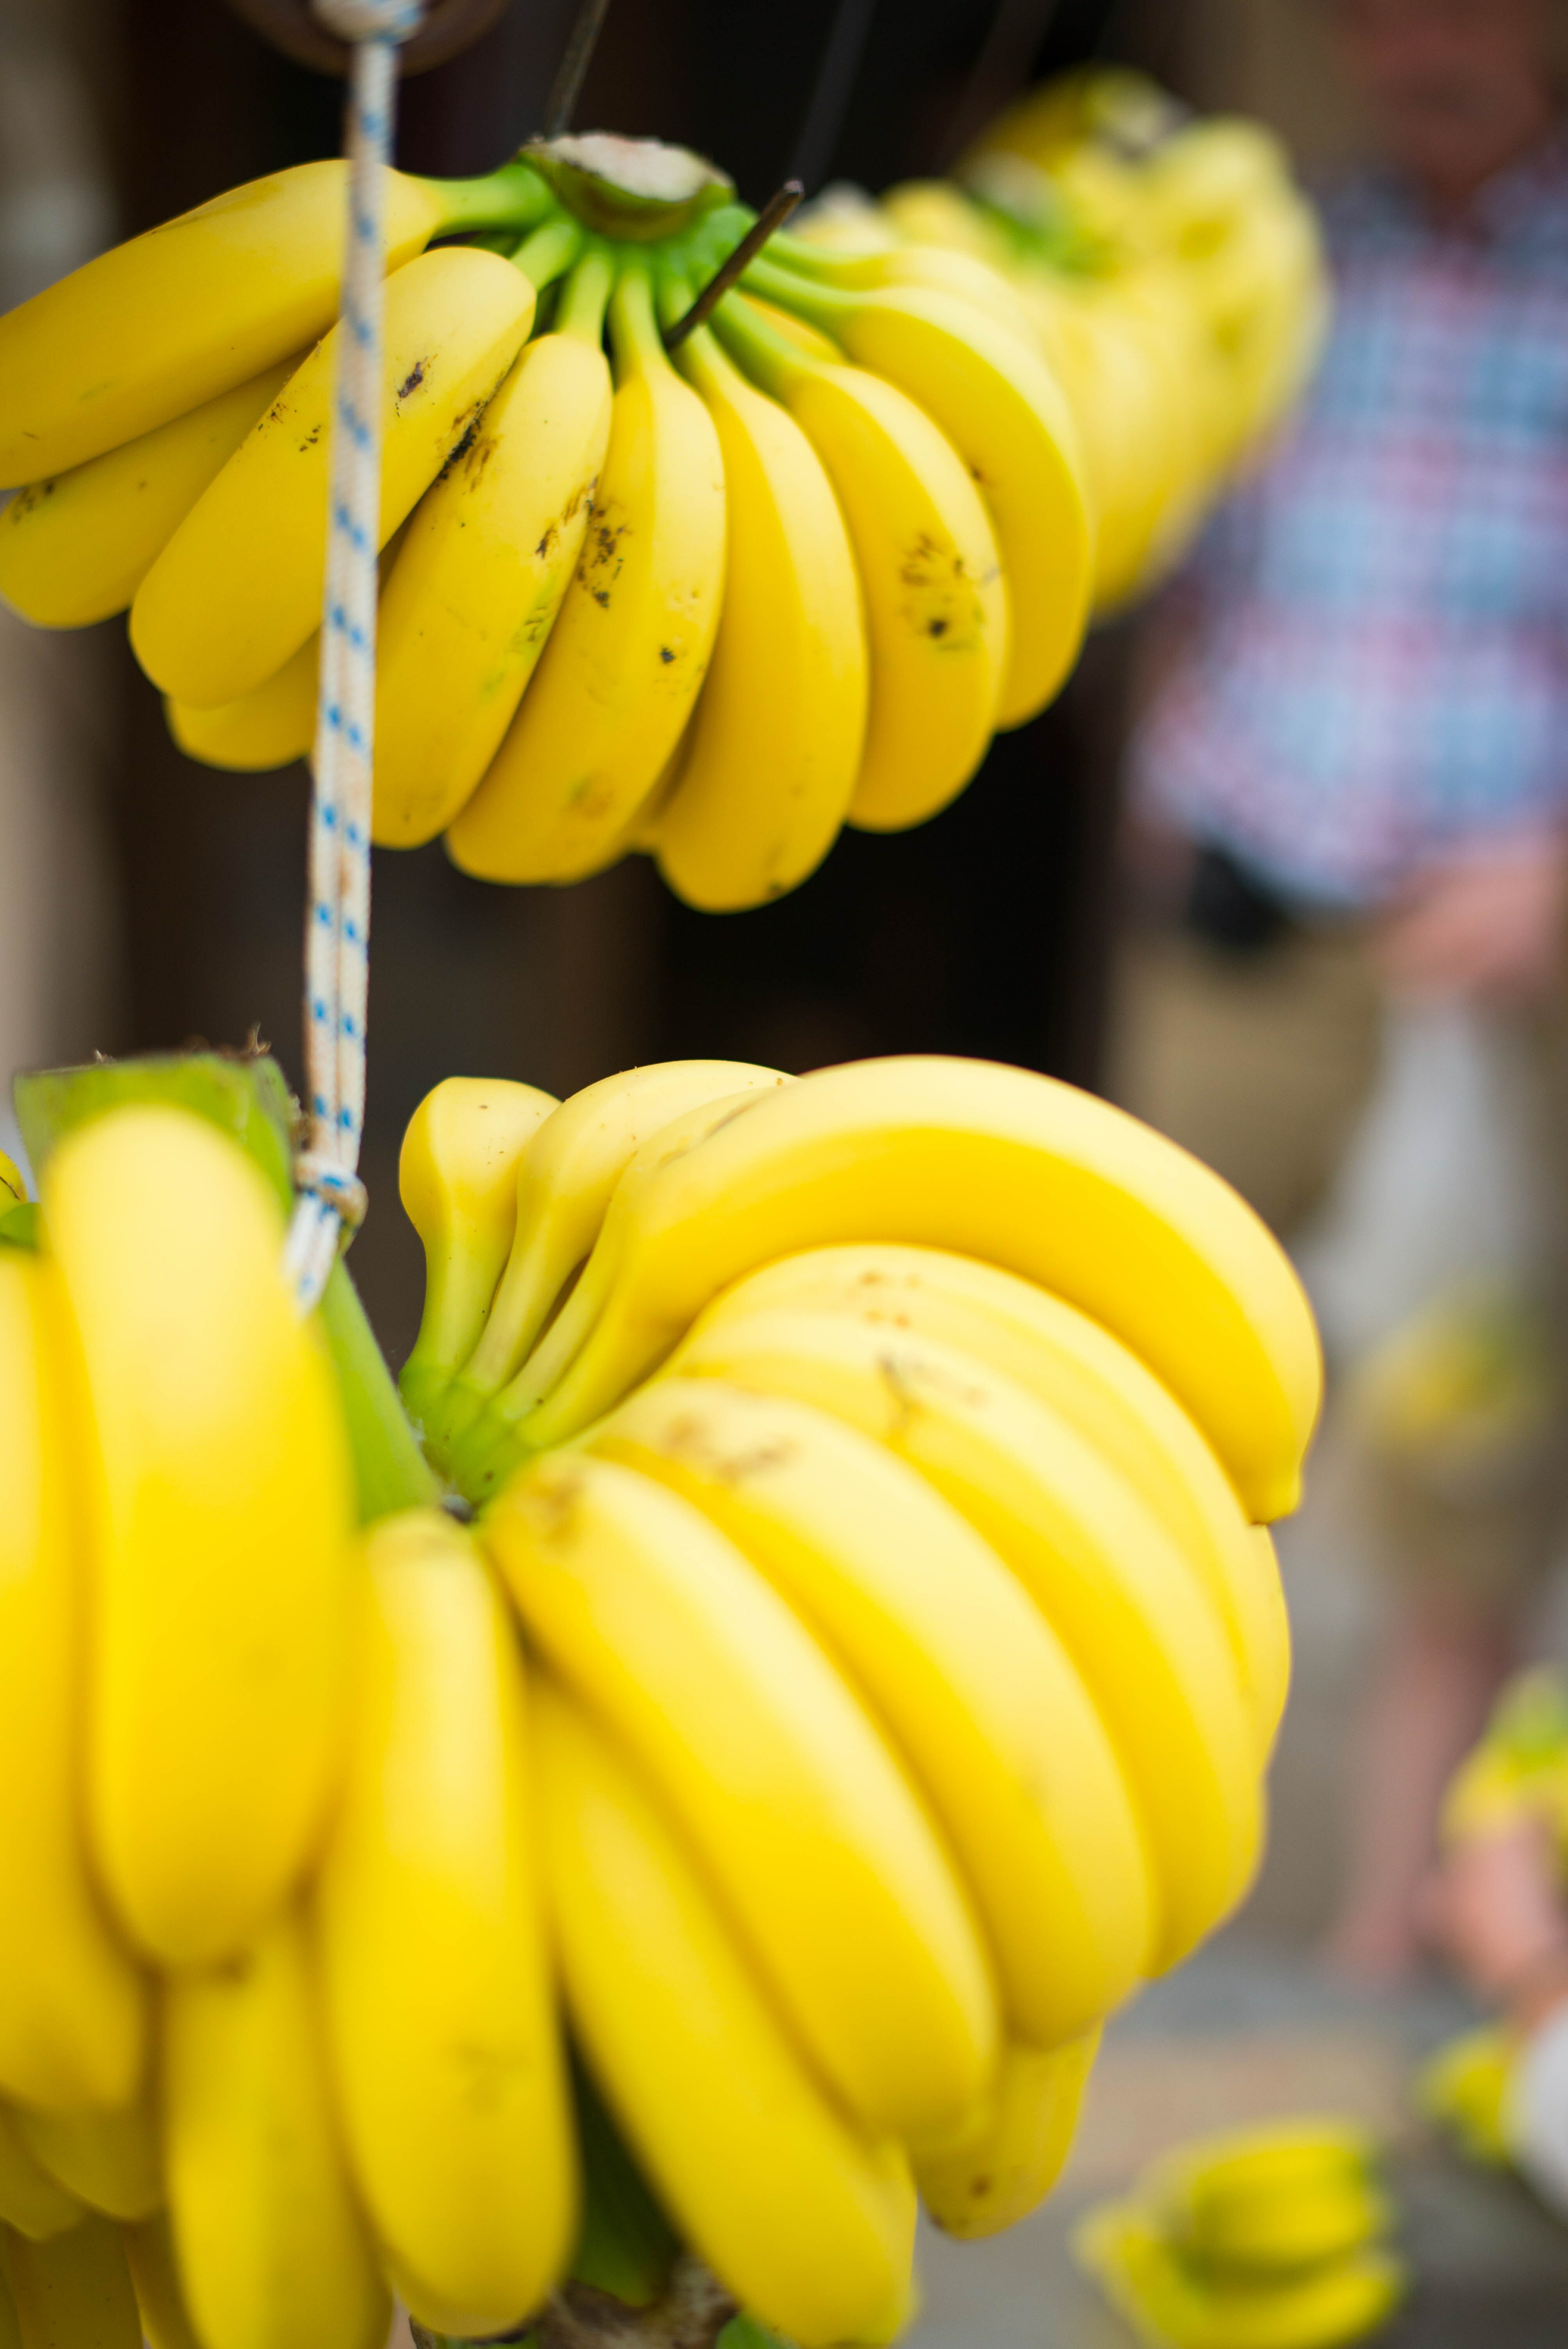 How To Store Bananas: 5 Simple Tips